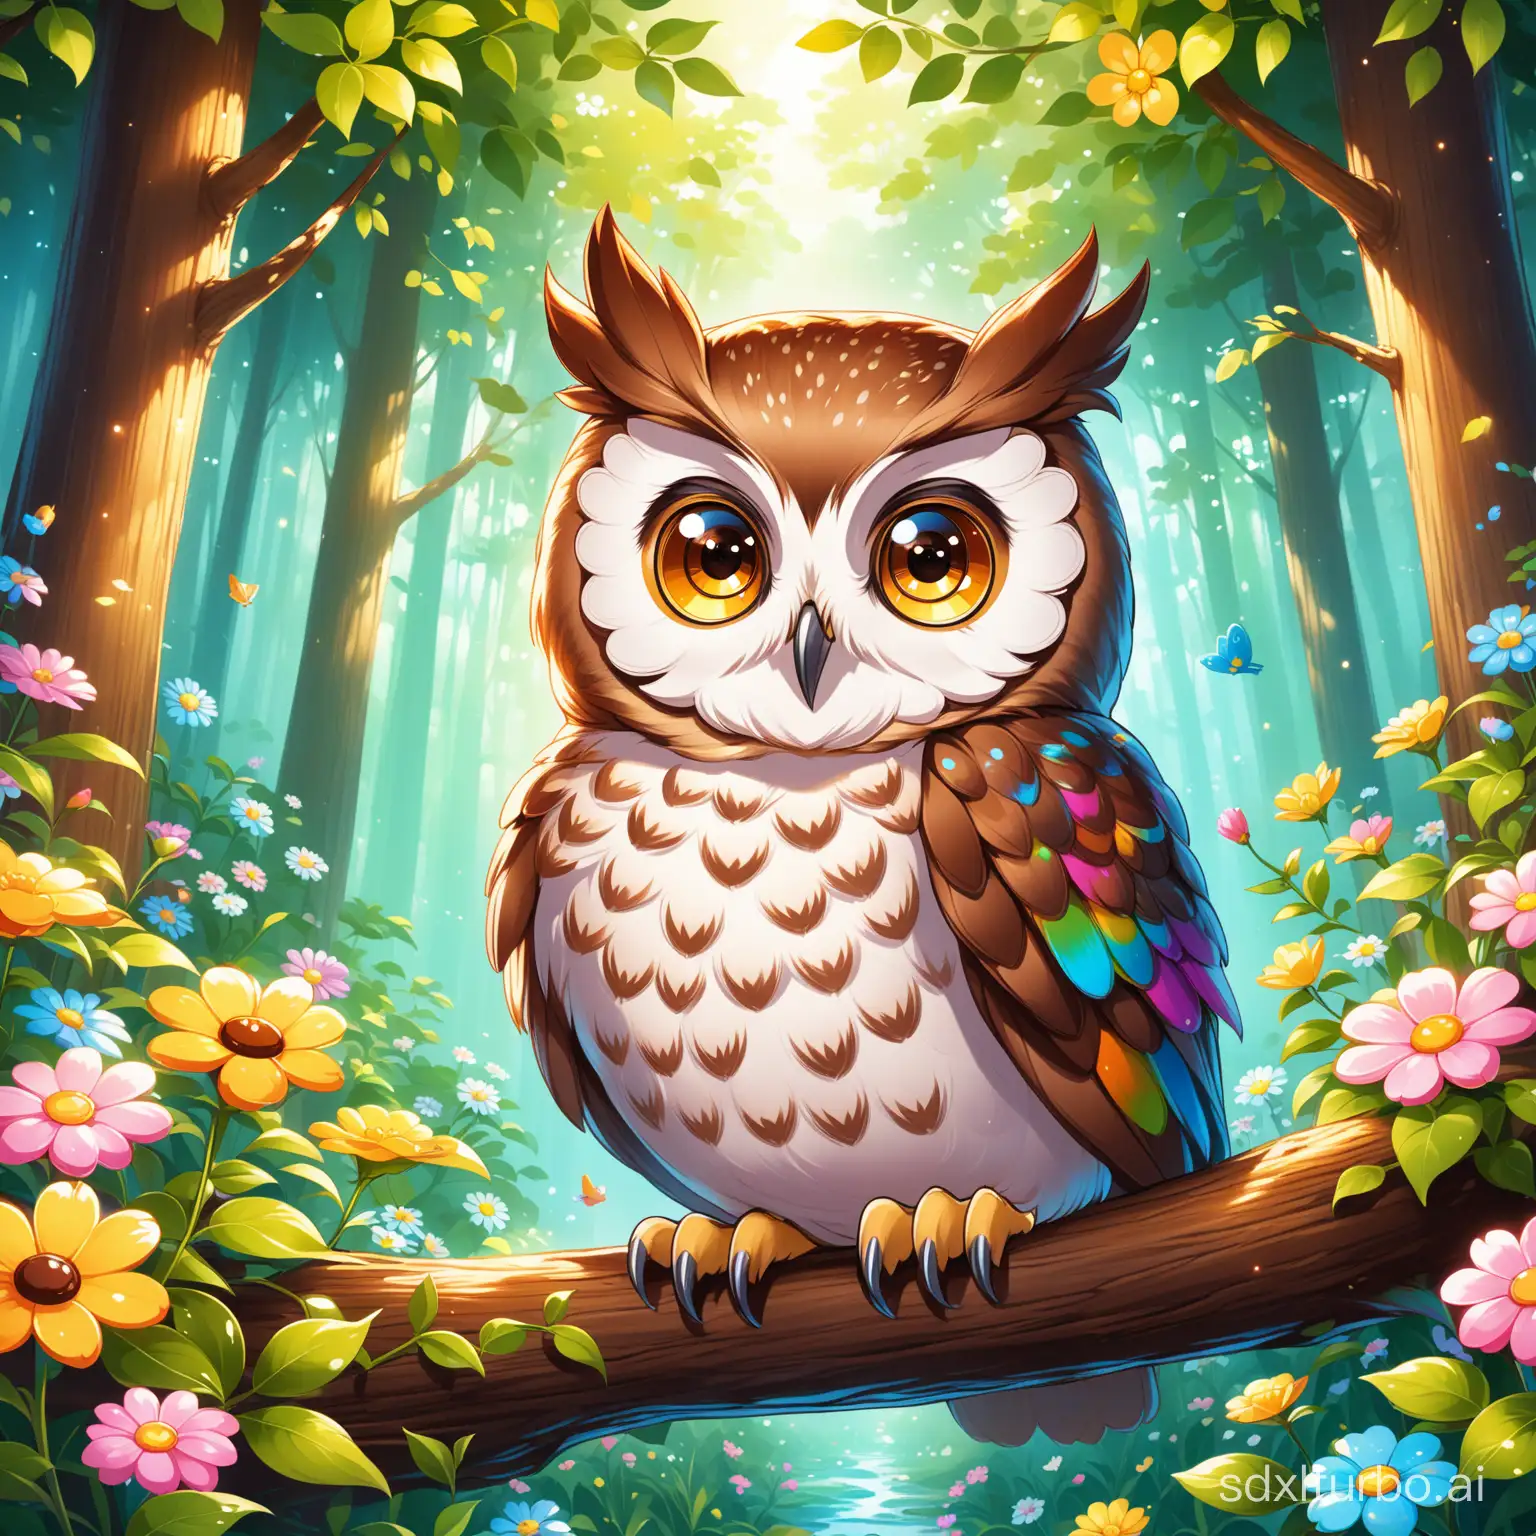 Fantasy-Cartoon-Owl-Portrait-Surrounded-by-Flowers-in-a-Forest-with-Children-Painting